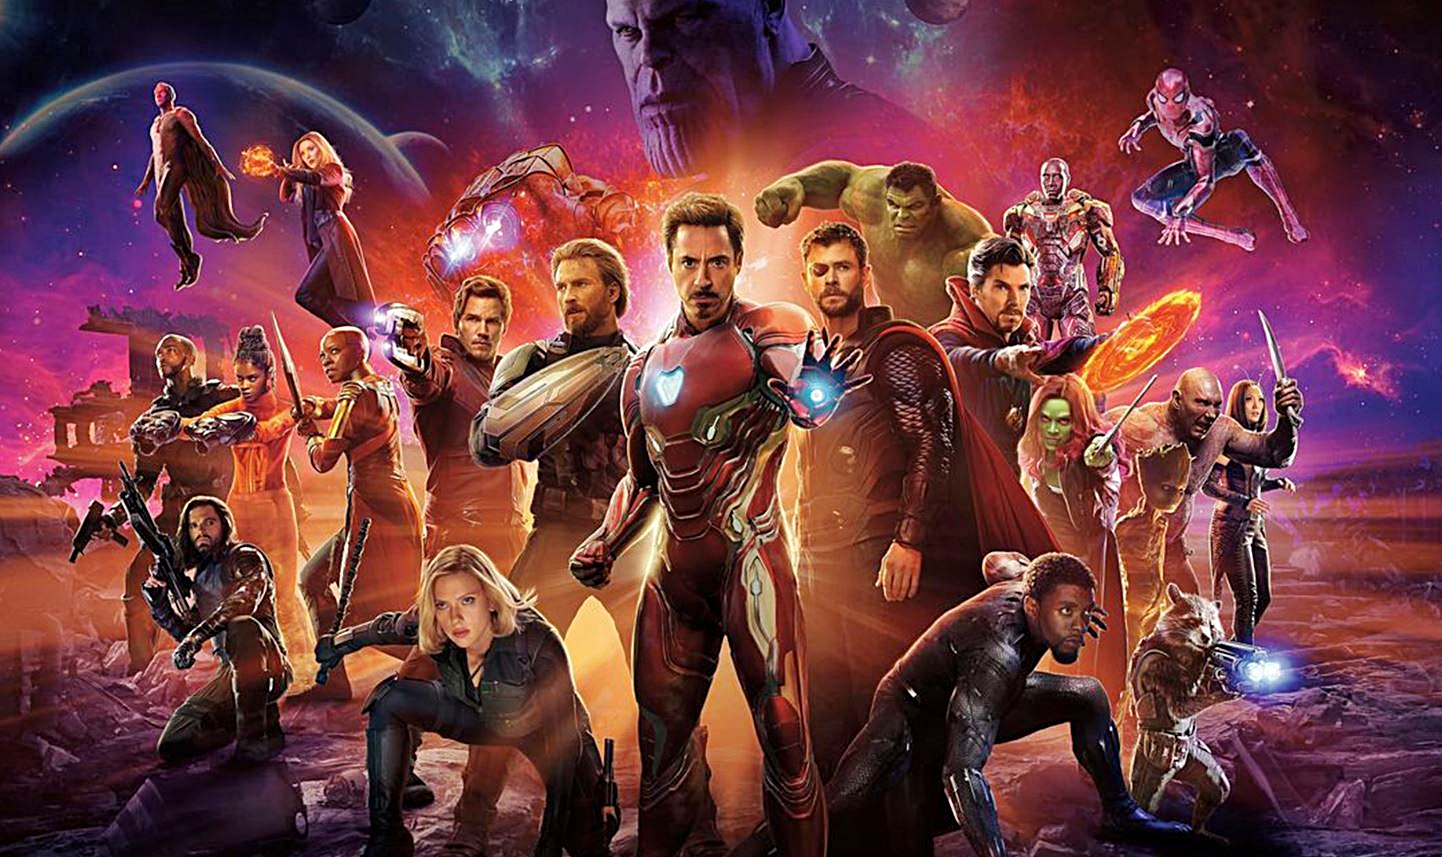 Can You Get 100% On This Avengers: Infinity War Quiz?